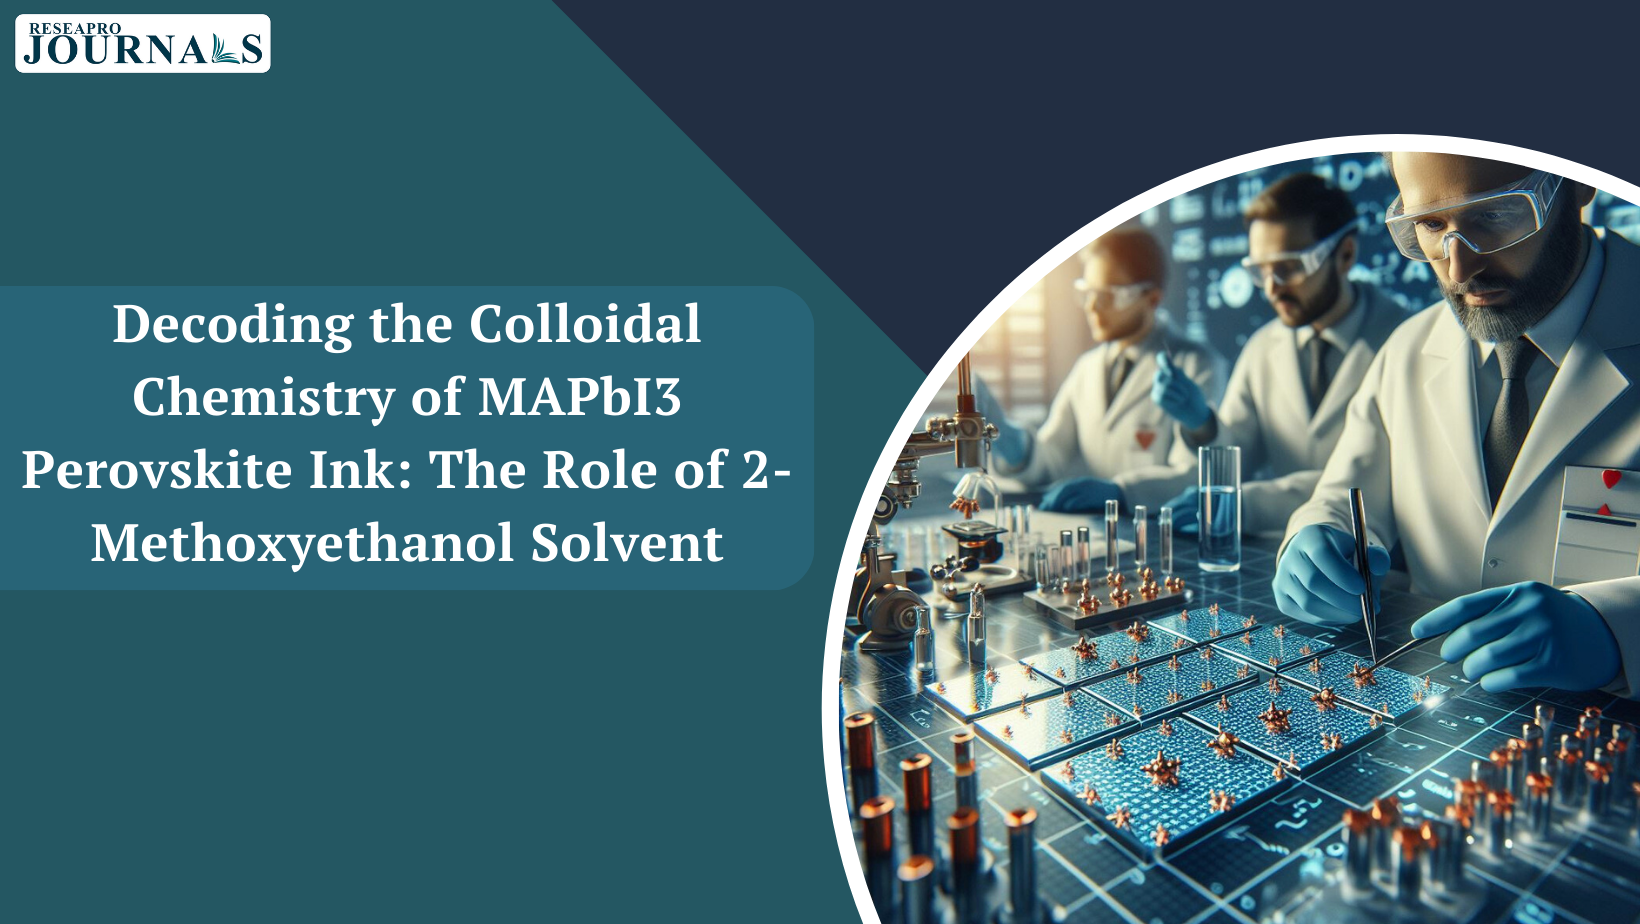 Decoding the Colloidal Chemistry of MAPbI3 Perovskite Ink: The Role of 2-Methoxyethanol Solvent